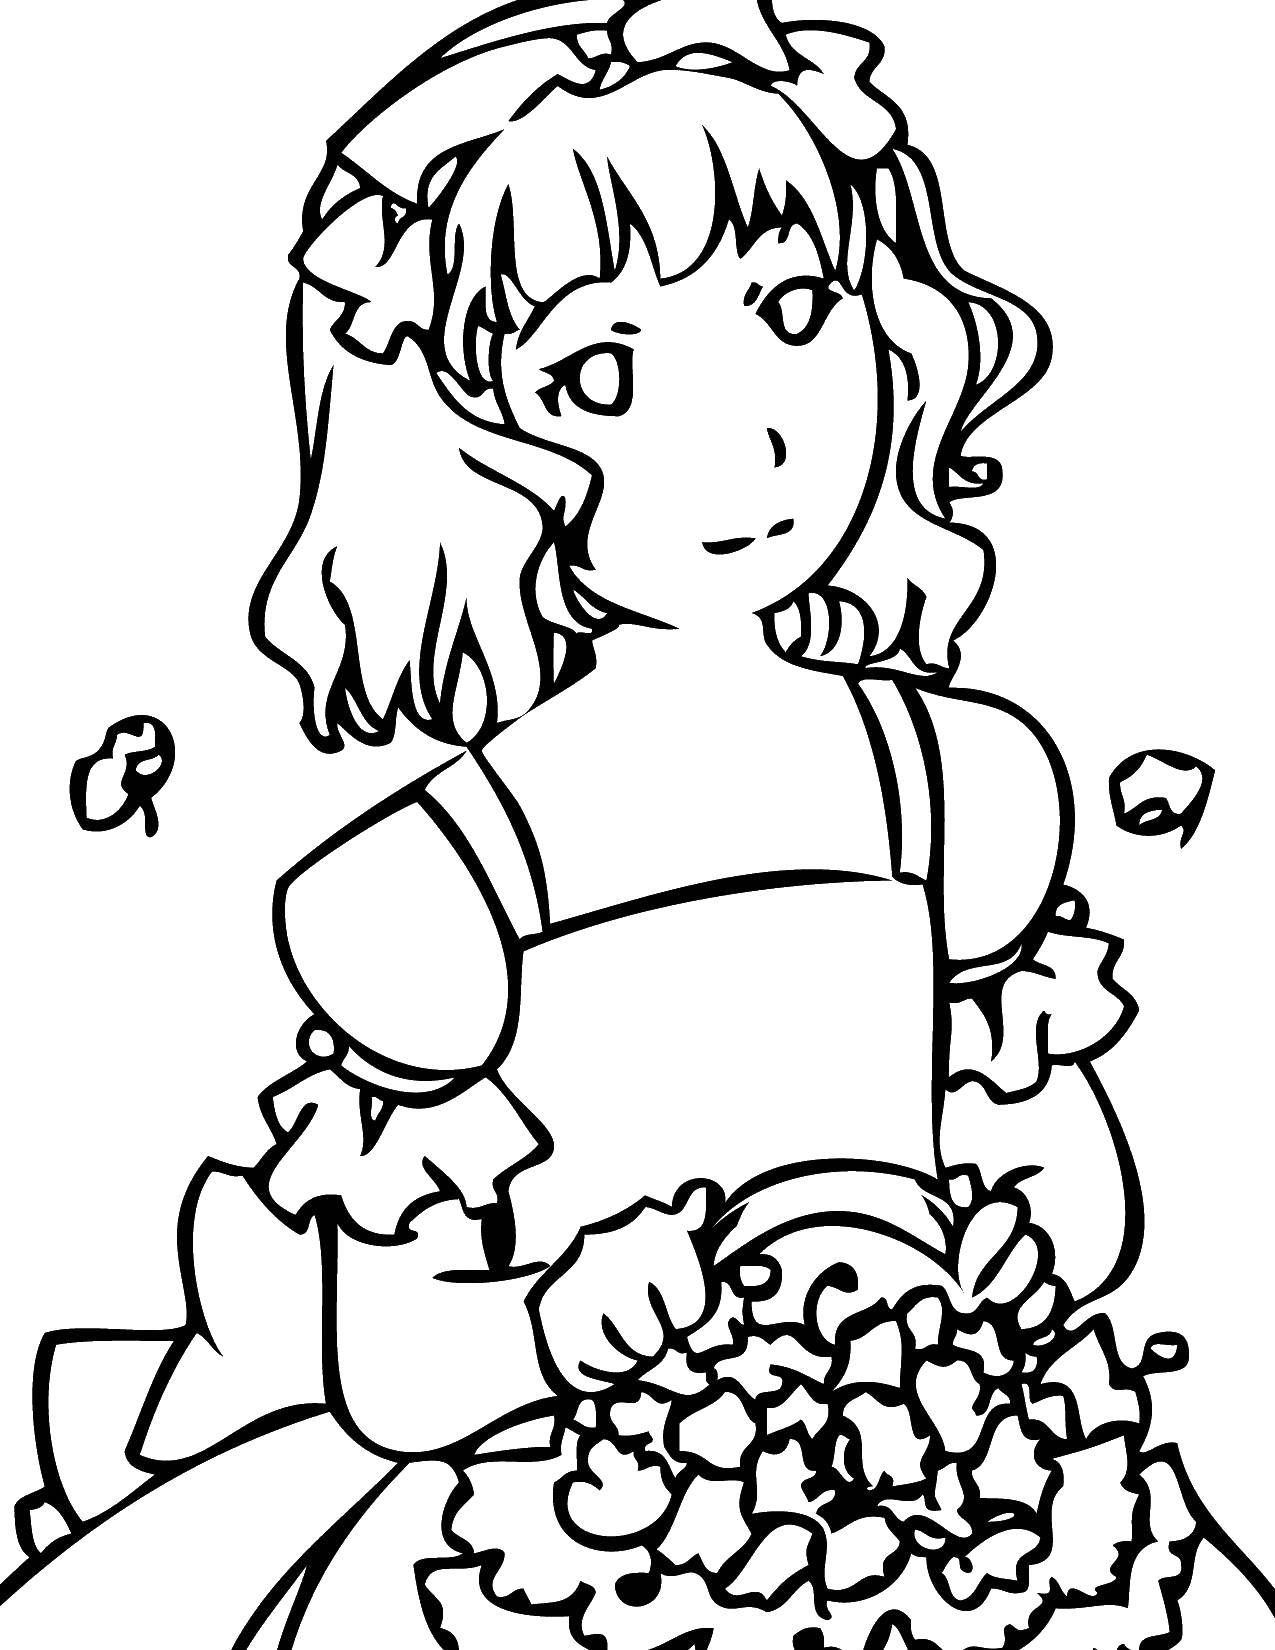 Coloring Girl with basket of flowers. Category Wedding. Tags:  wedding, girl, flowers.